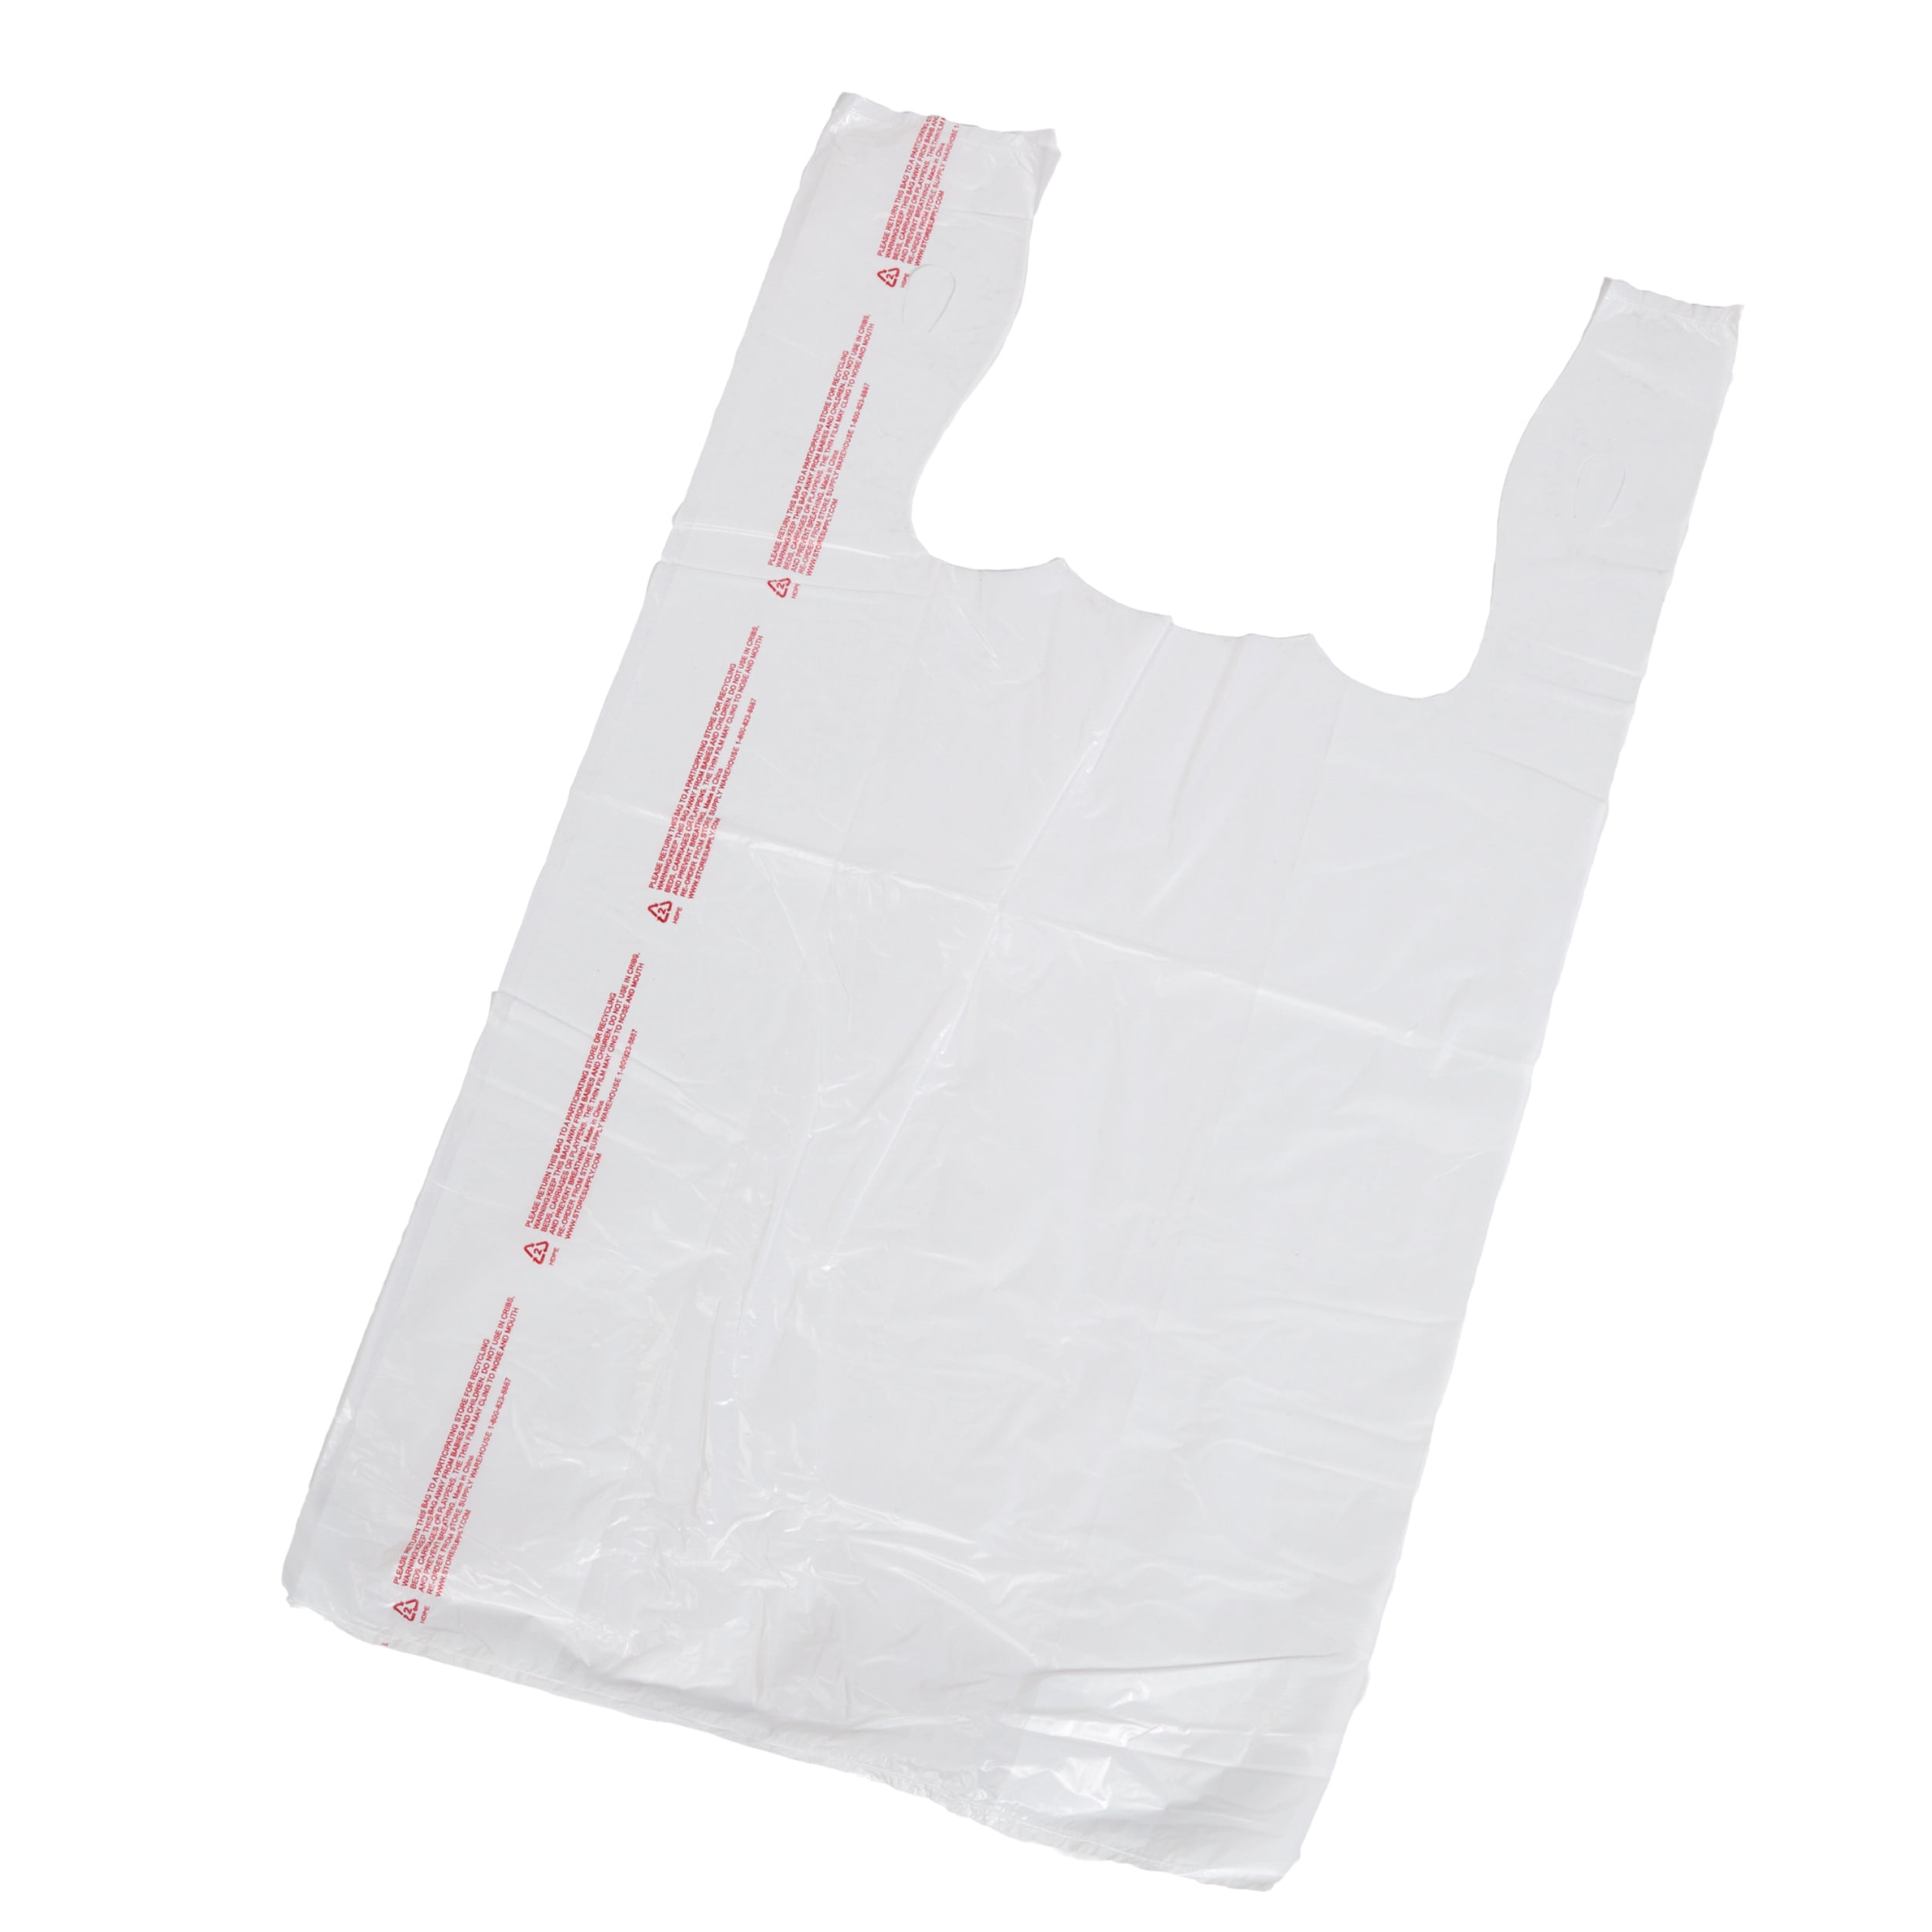 Large Plastic Thank You Bags T Shirt Bags 18 x 8 x 30 Case of 500